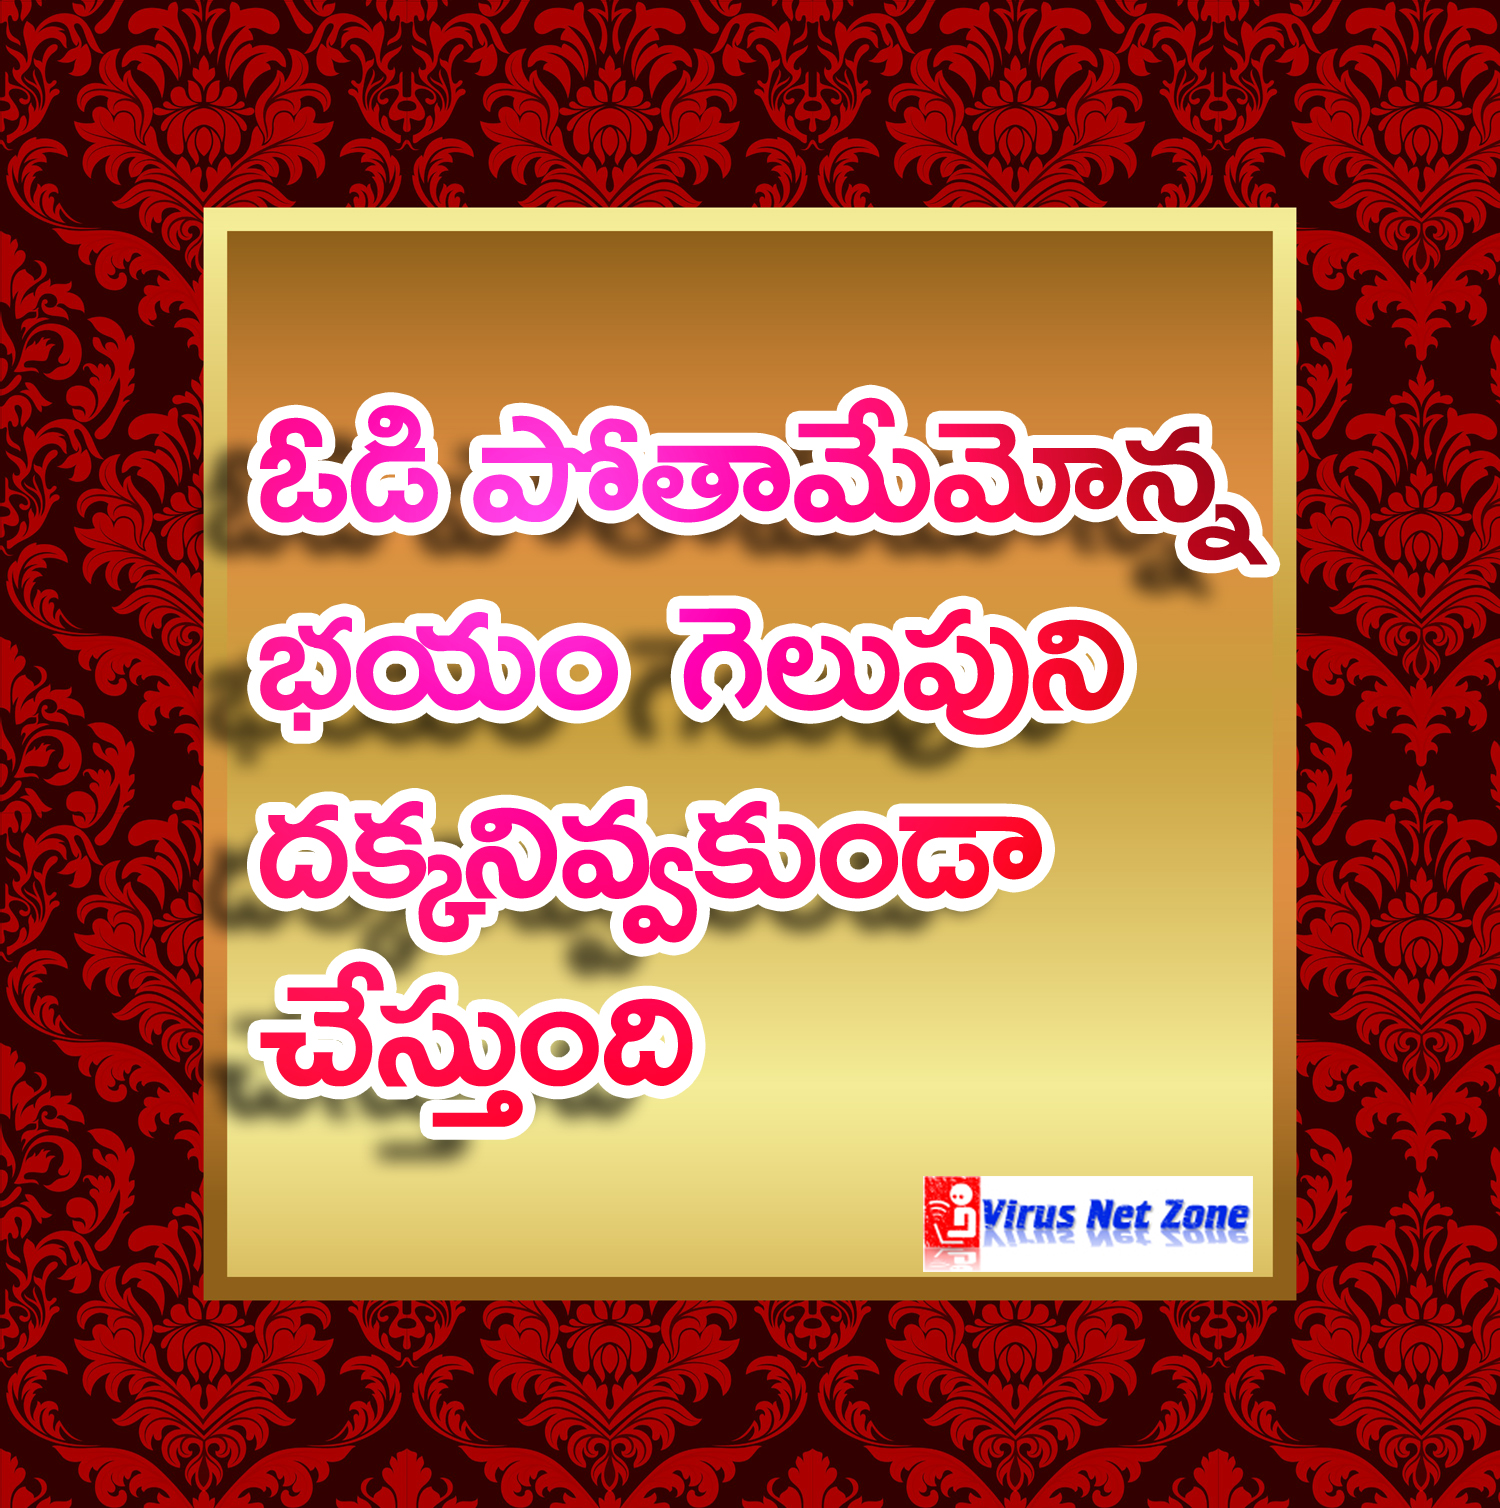 Telugu Inspirational Quotes Of Successful Life Fearless Quotes In